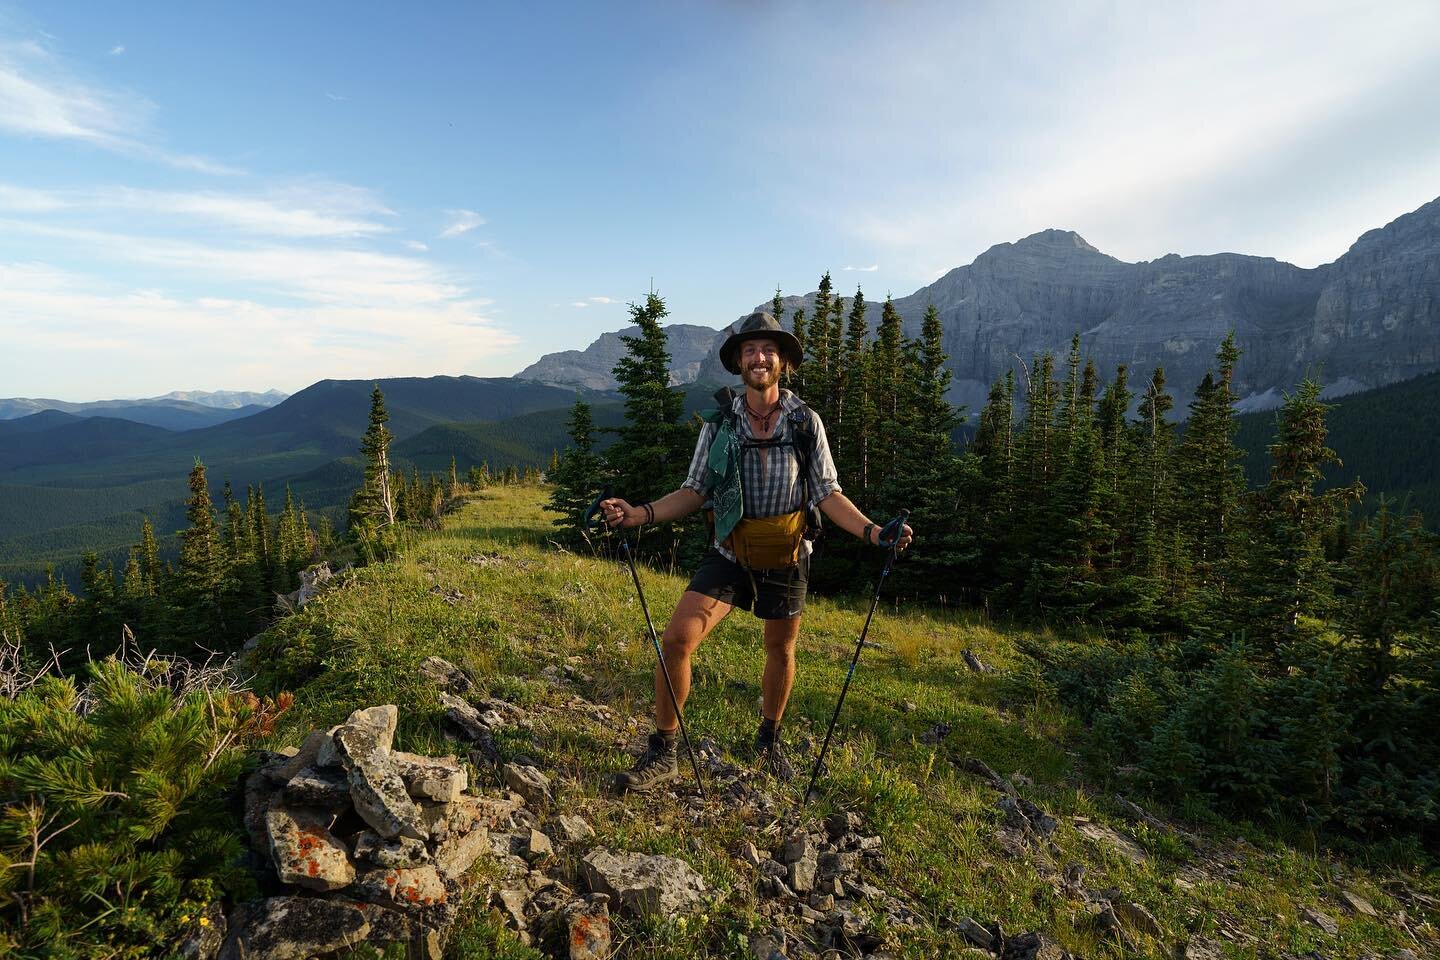 Few of my favorite moments from Section &ldquo;A&rdquo; of the Great Divide Trail. Anyone else stretch a lot on trail? 😂 
.
#gdt #greatdividetrail #thruhike #hikertrash #canadianrockies